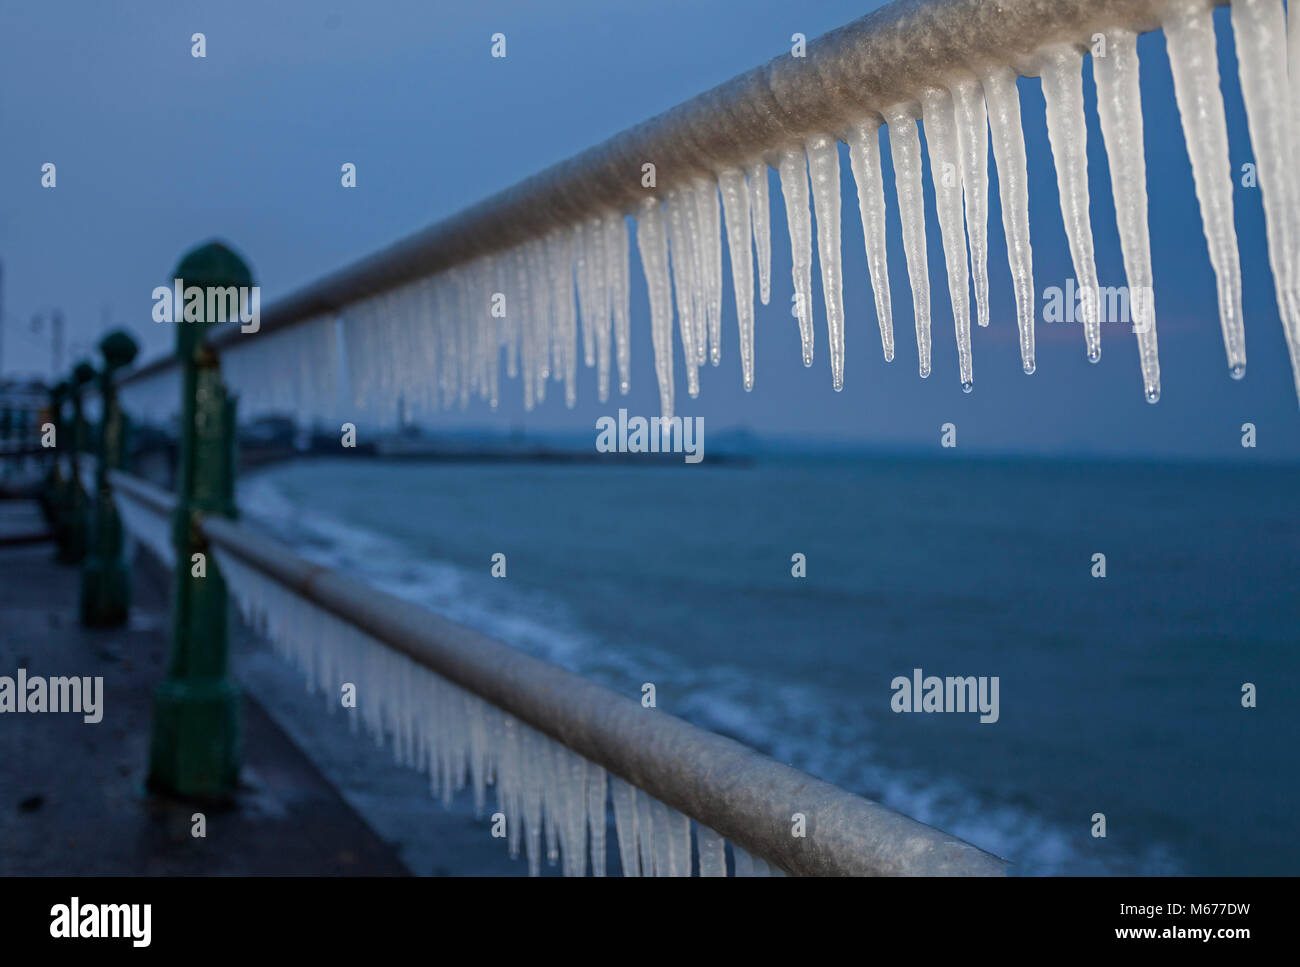 Penzance, Cornwall. 1st Mar, 2018. UK Weather. Penzance, Cornwall UK. Sea water has frozen in to dramatic icicles on the seaside town's promenade railings during the Beast from the East,  Credit Mike Newman/AlamyLiveNews Stock Photo